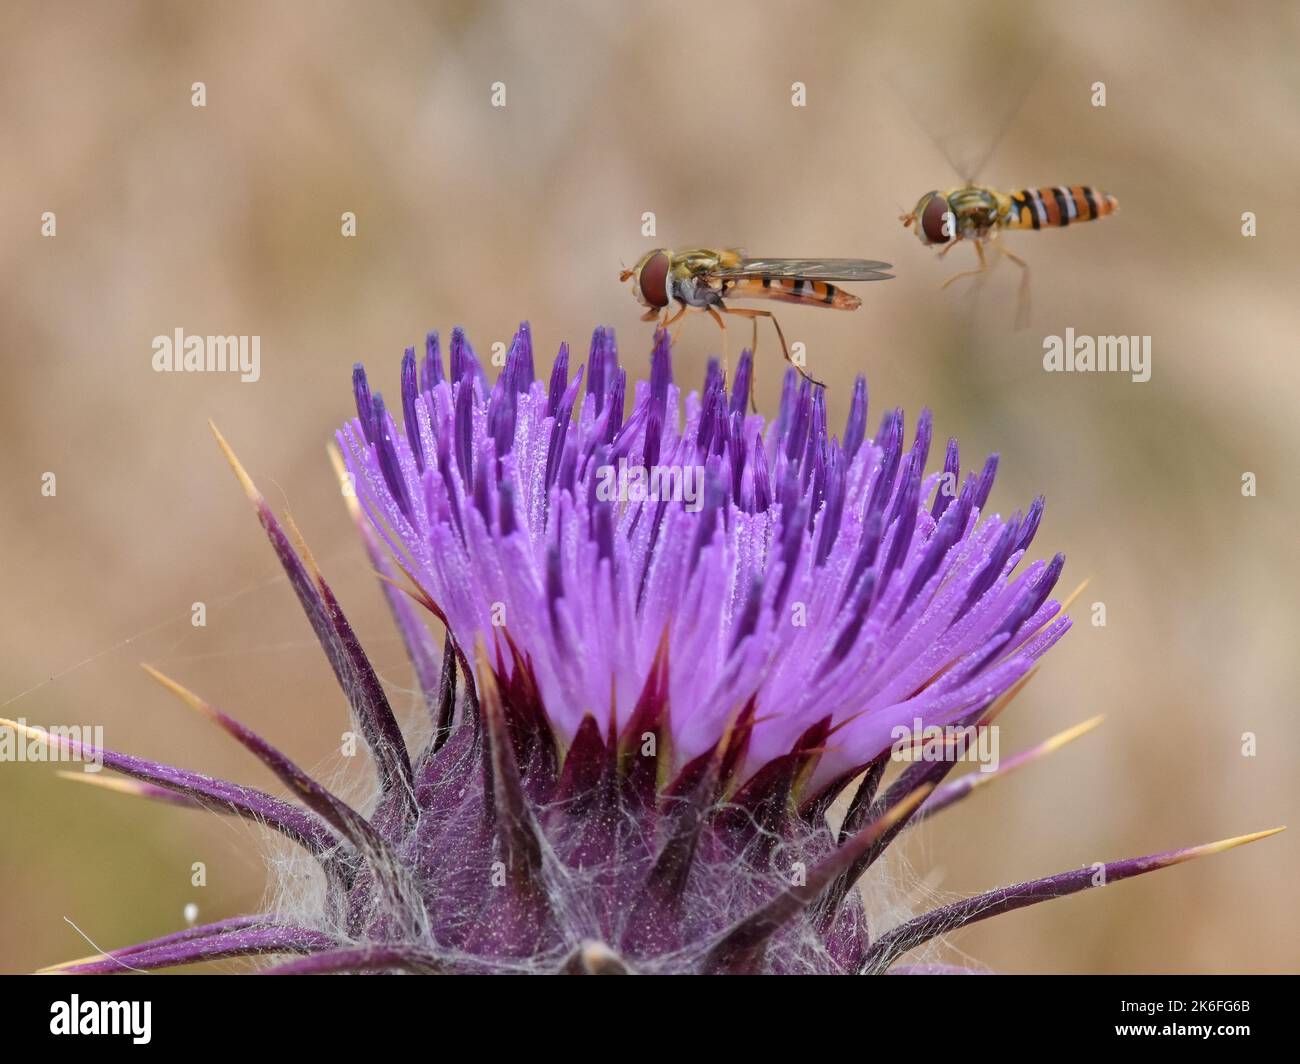 Hover fly on thorn Stock Photo